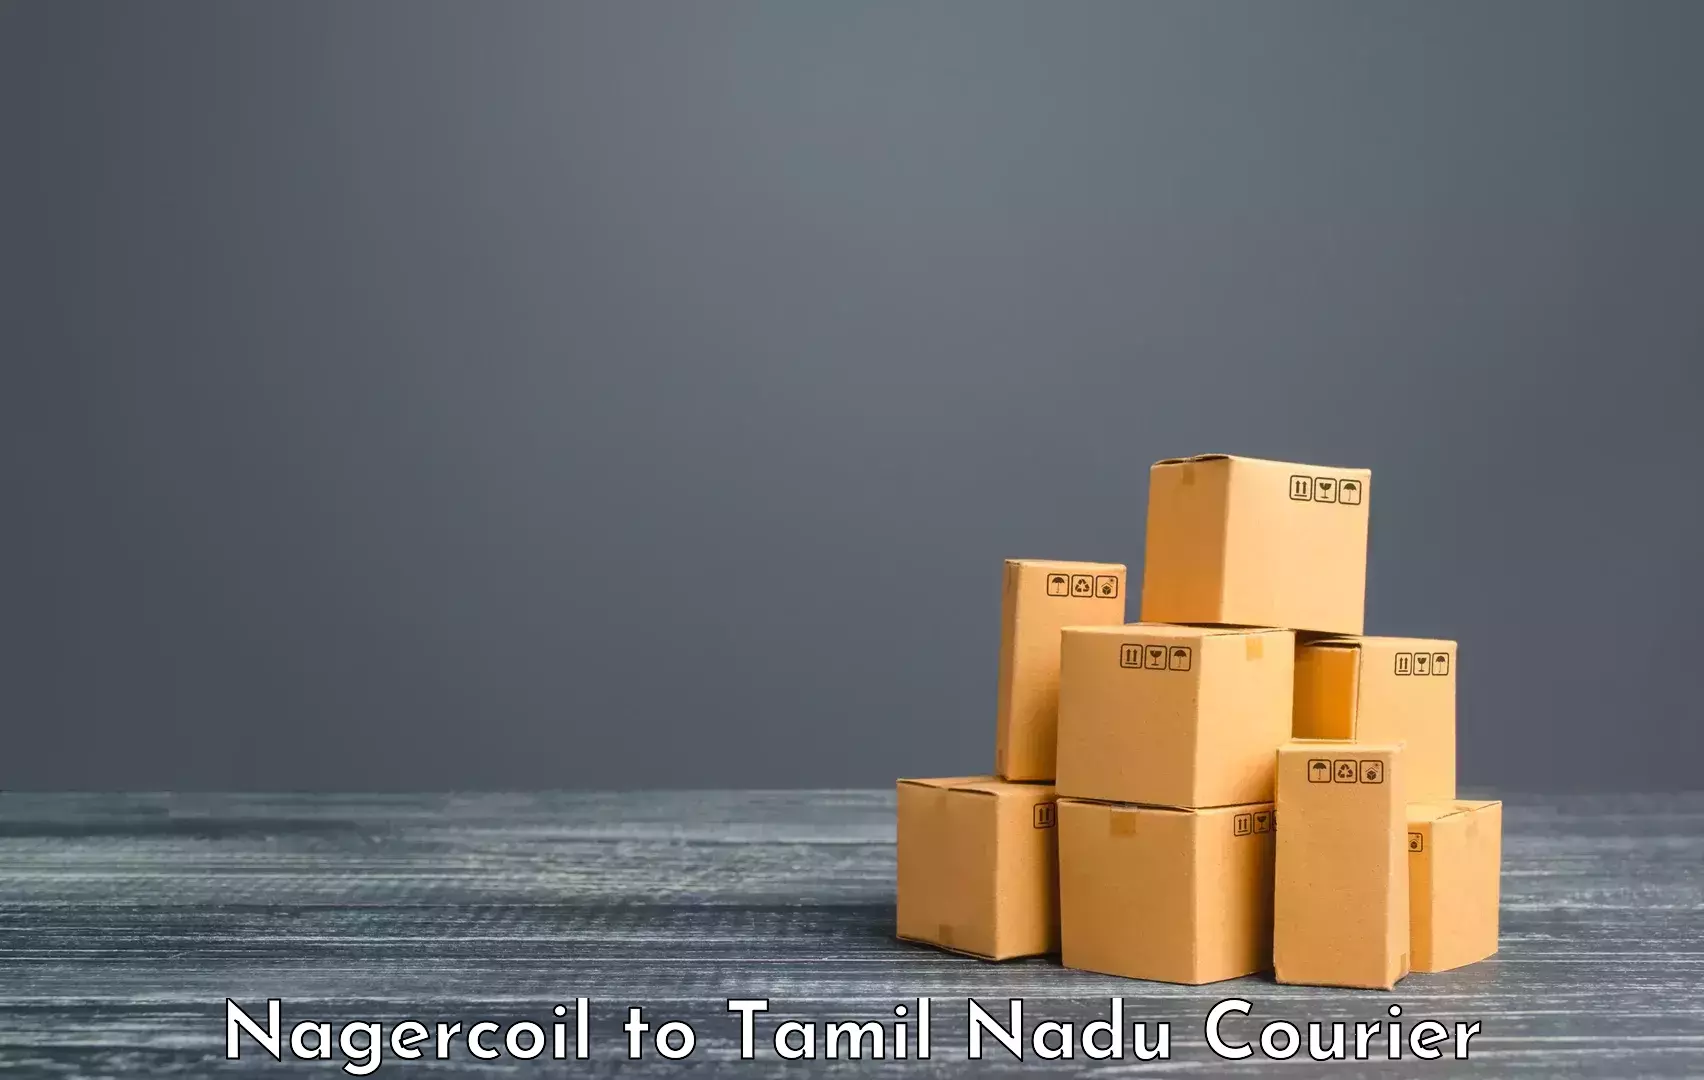 Same day luggage service Nagercoil to Tamil Nadu